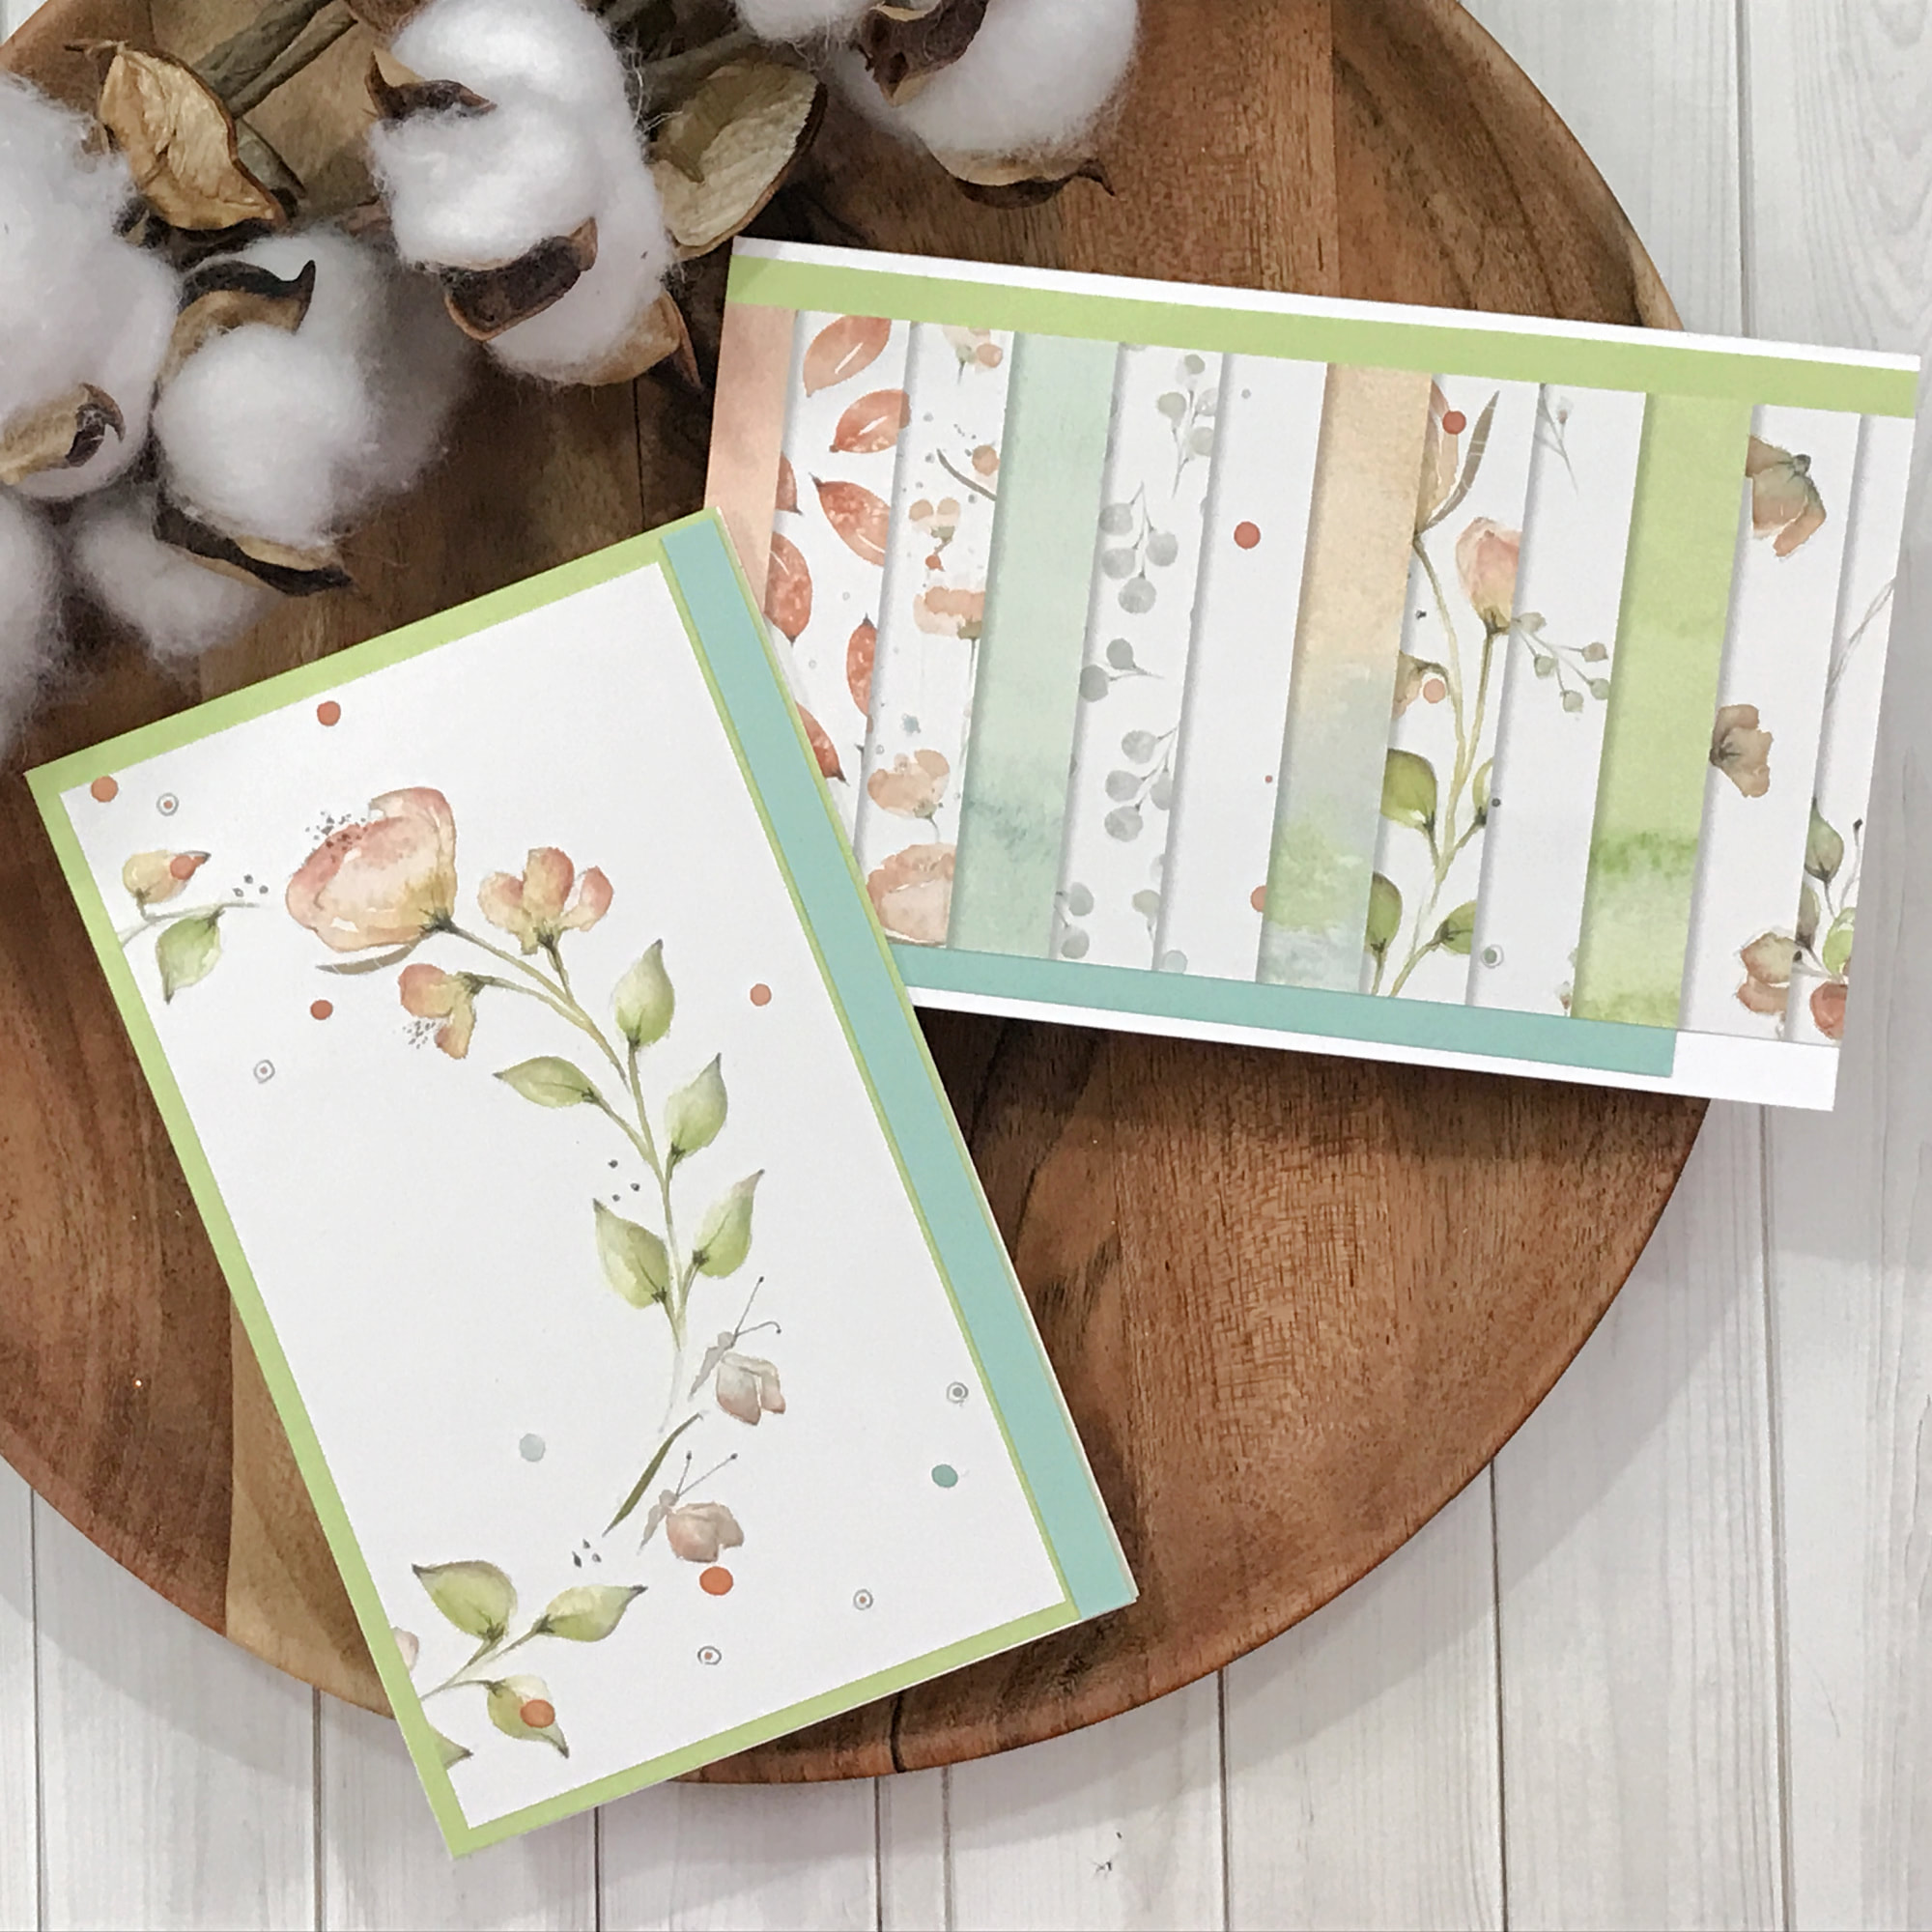 Easy Card Making with Patterned Paper and a Card Sketch - ON Y GO